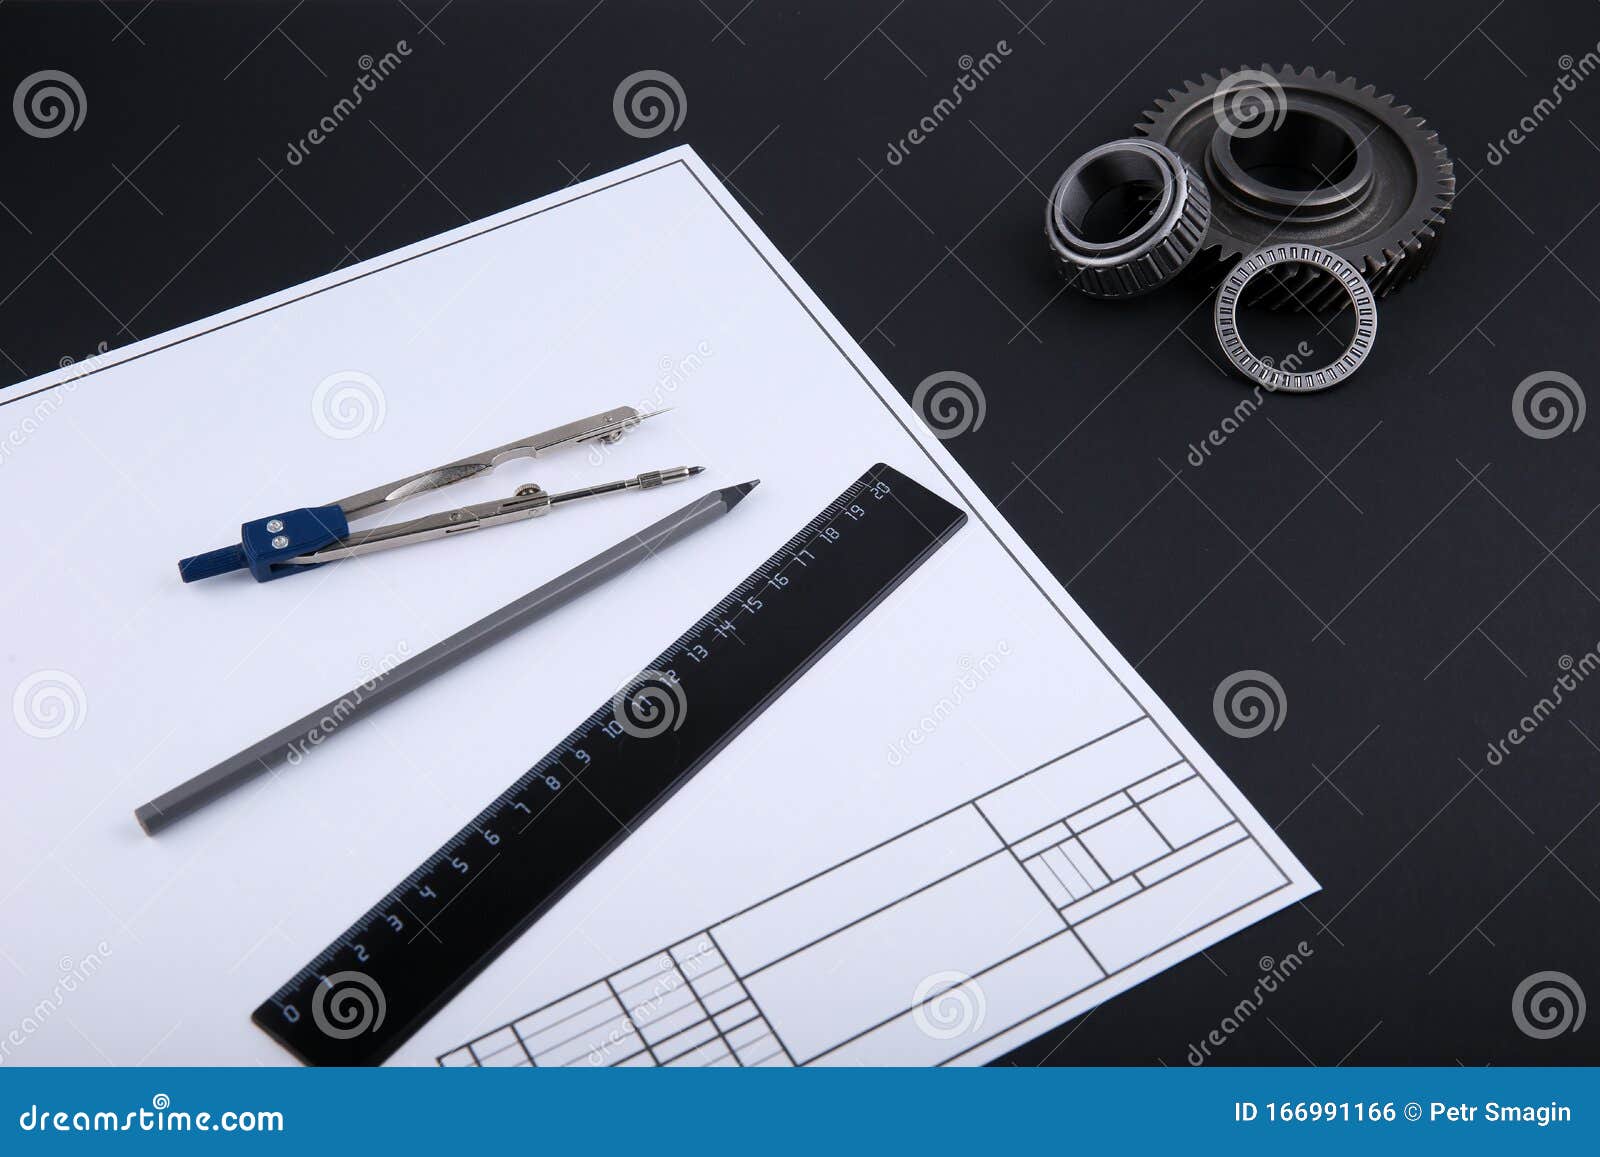 Engineering Background with Drafting Accessories Stock Photo - Image of ...